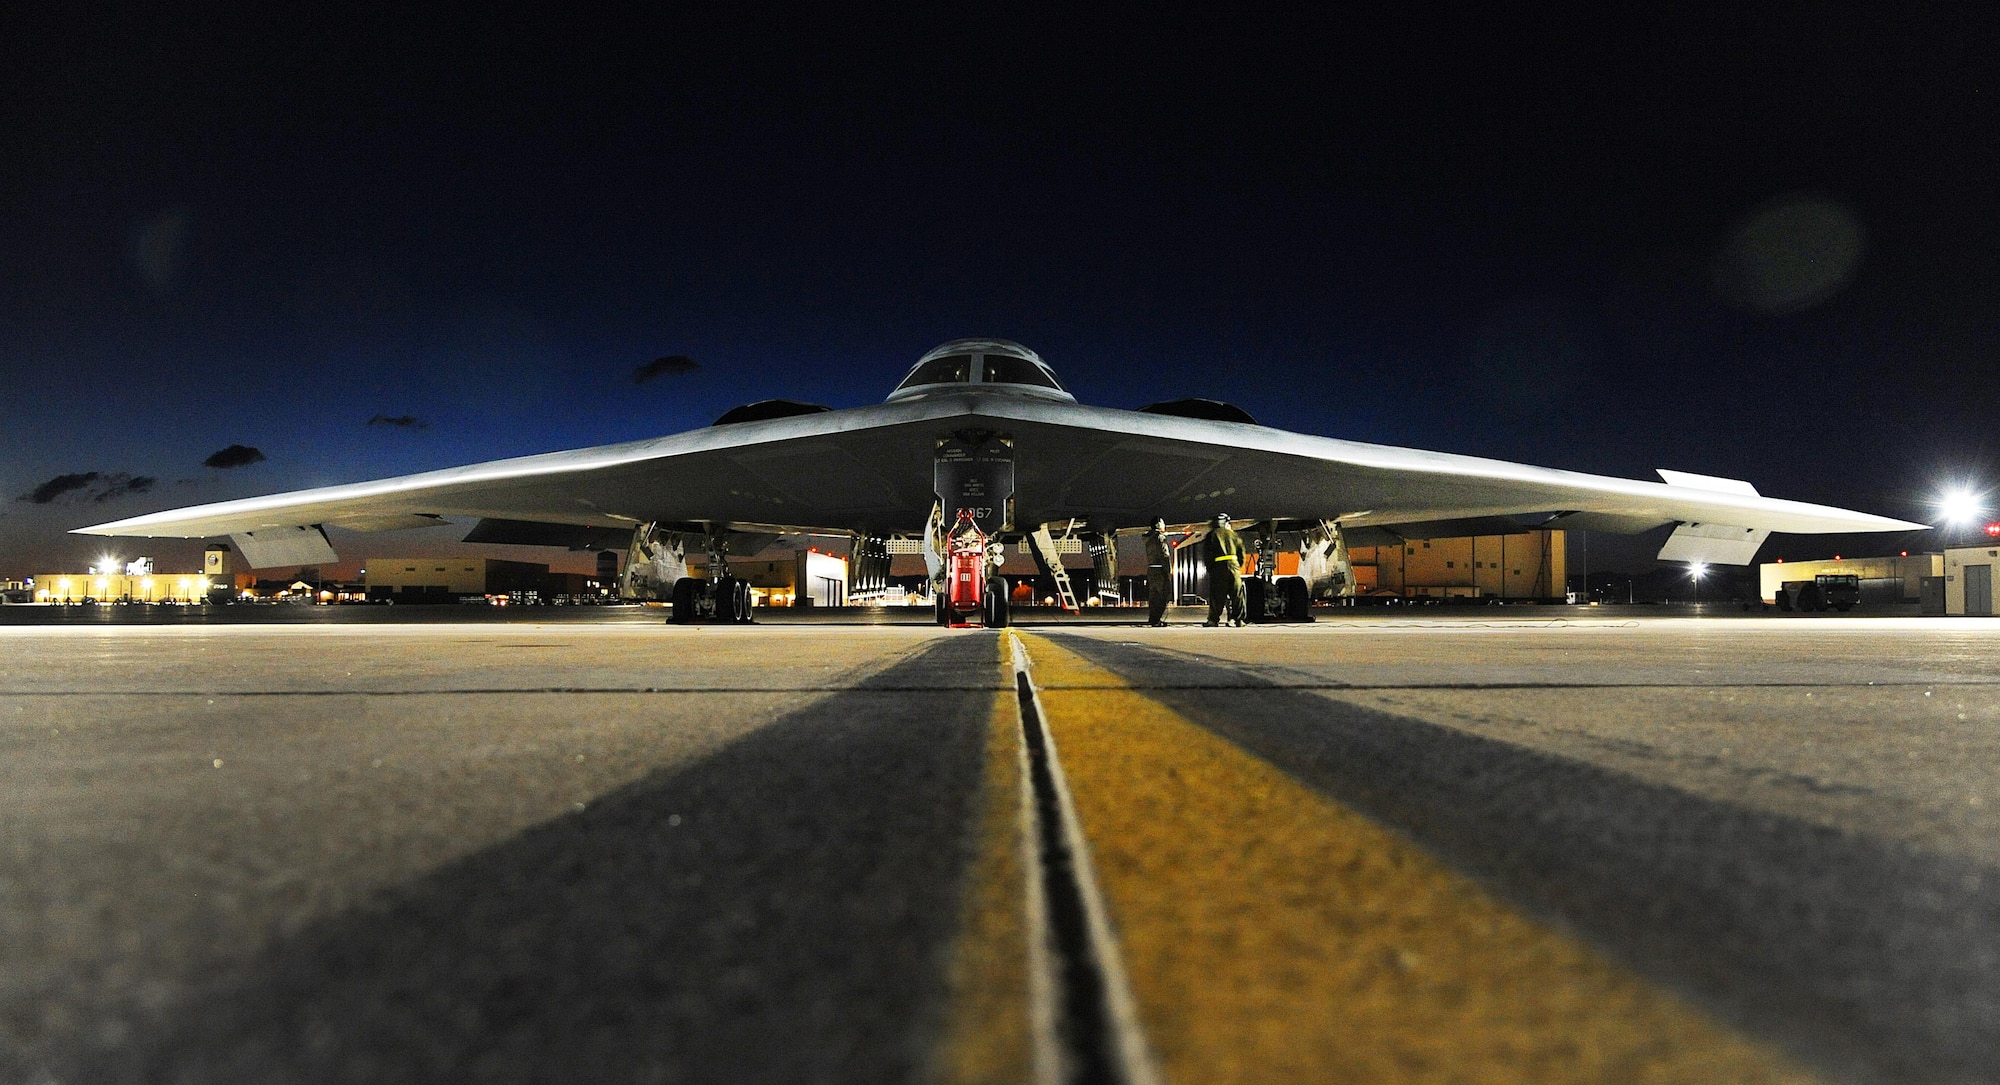 A U.S. Air Force B-2 Spirit aircraft sits on the flightline prior to takeoff at Whiteman Air Force Base, Mo., for Red Flag (RF) 16-1 Feb. 2, 2016. Established in 1975, RF includes command, control, intelligence and electronic warfare exercises to better prepare forces for combat.